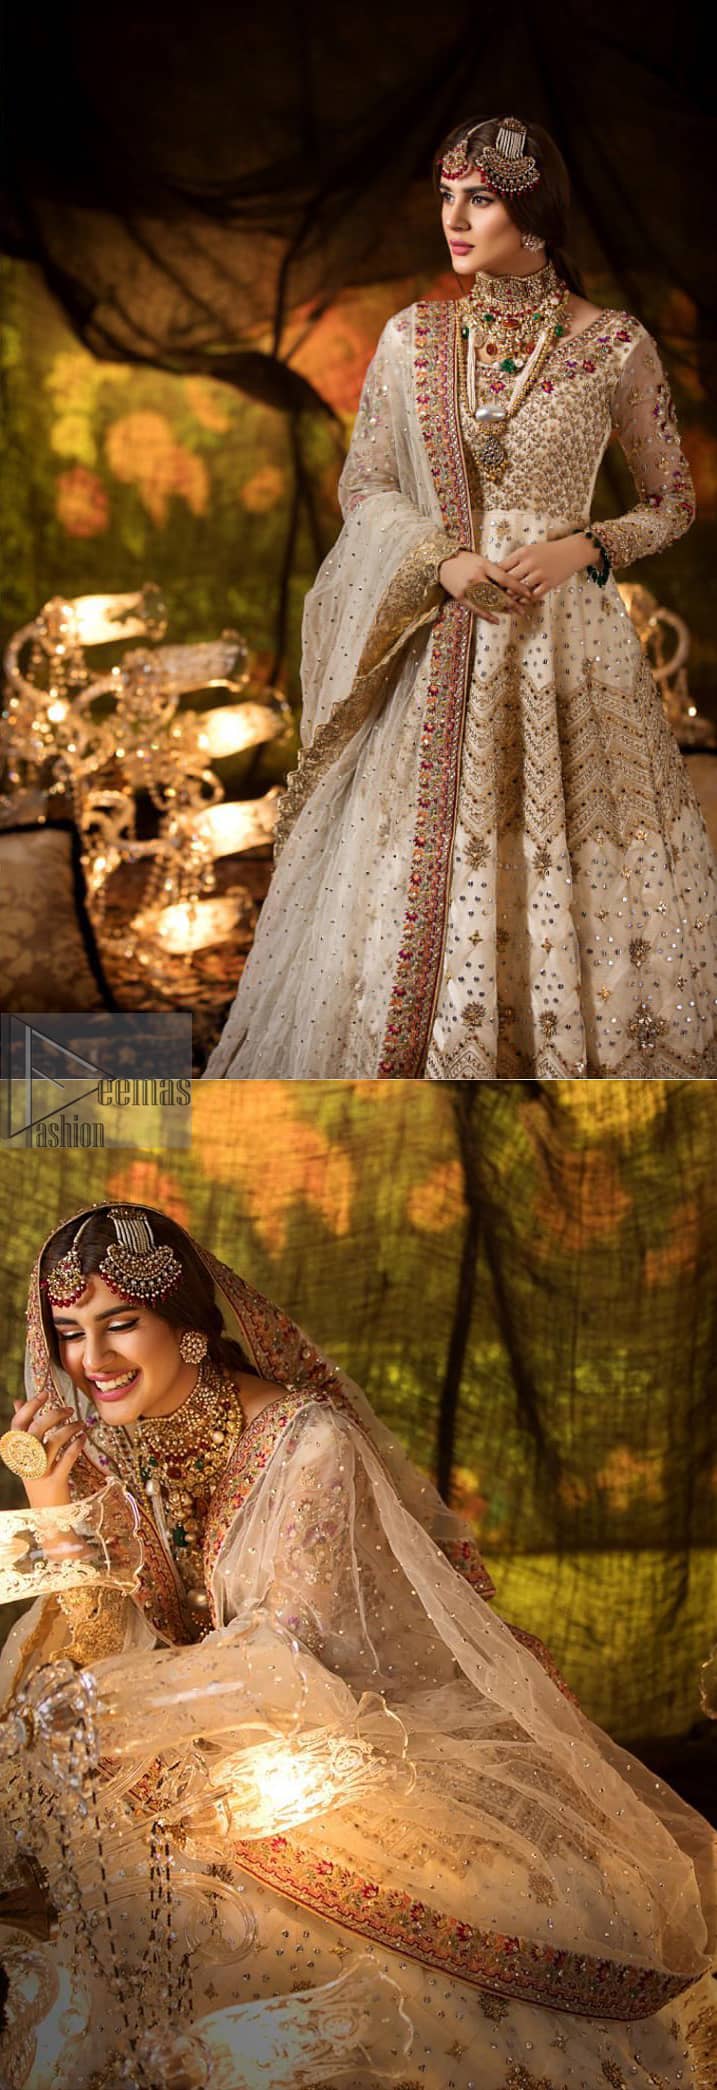 Delicately crafted and personifying chic elegance with an element of grandiose. This outfit is beautifully sculptured with geometric embroidery, adorned with heavy embellished bottom with golden and antique shaded kora, dabka, pearl and sequins work all over. Furthermore the outfit is emphasized with colorful thread work and mukesh embroidery. It is coordinated with ivory dupatta with sequins sprayed all over it along with zardozi work all around the edges to make the look complete.